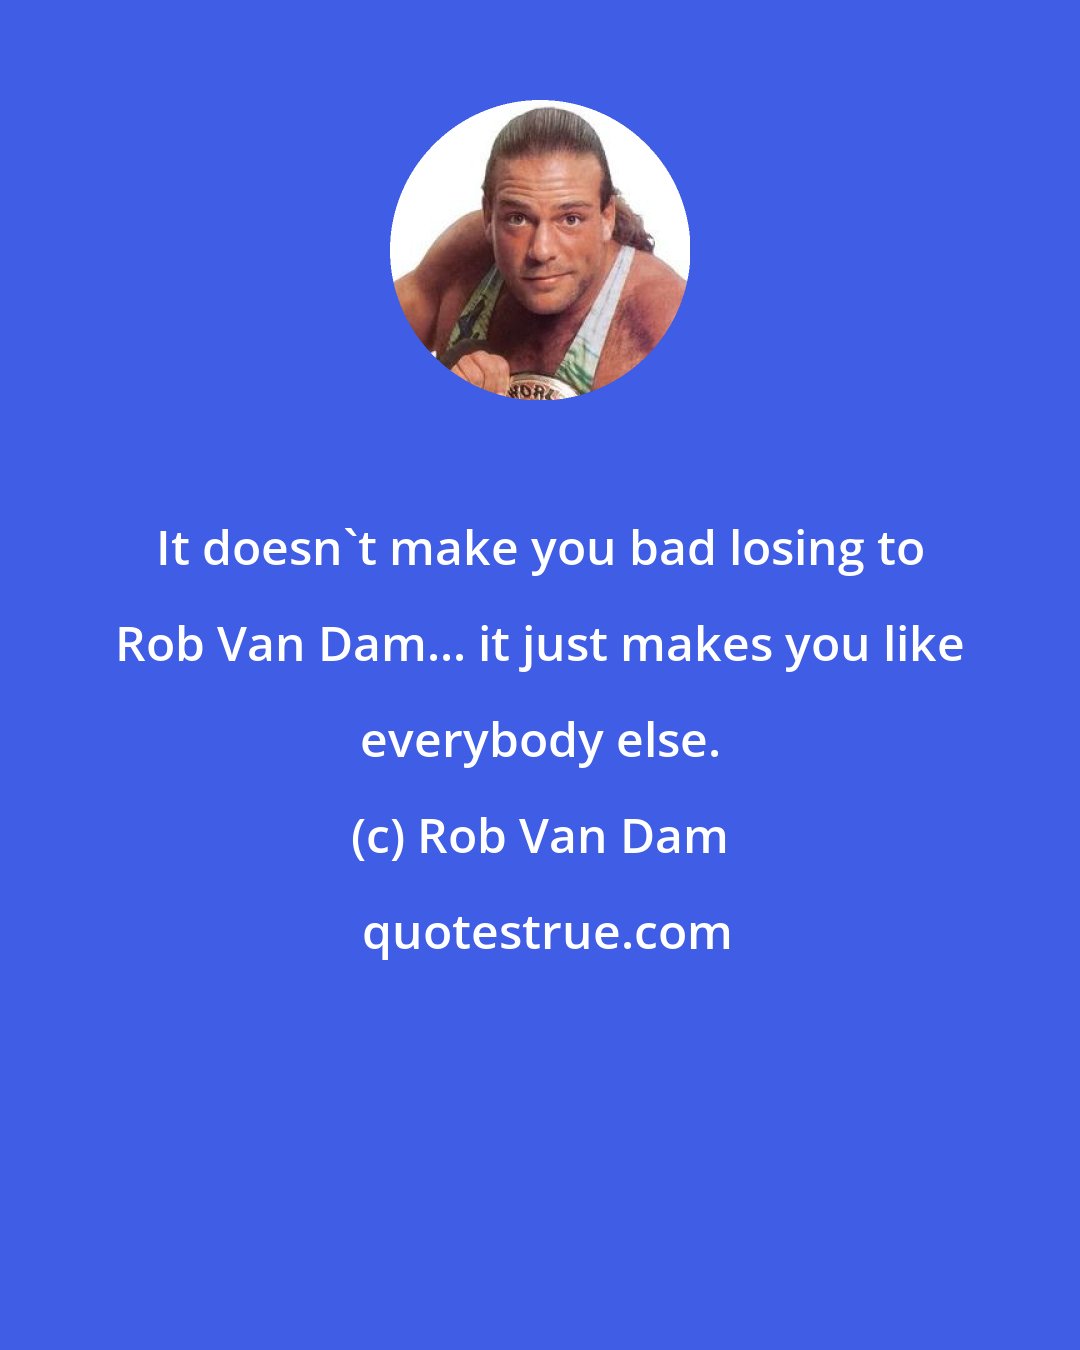 Rob Van Dam: It doesn't make you bad losing to Rob Van Dam... it just makes you like everybody else.